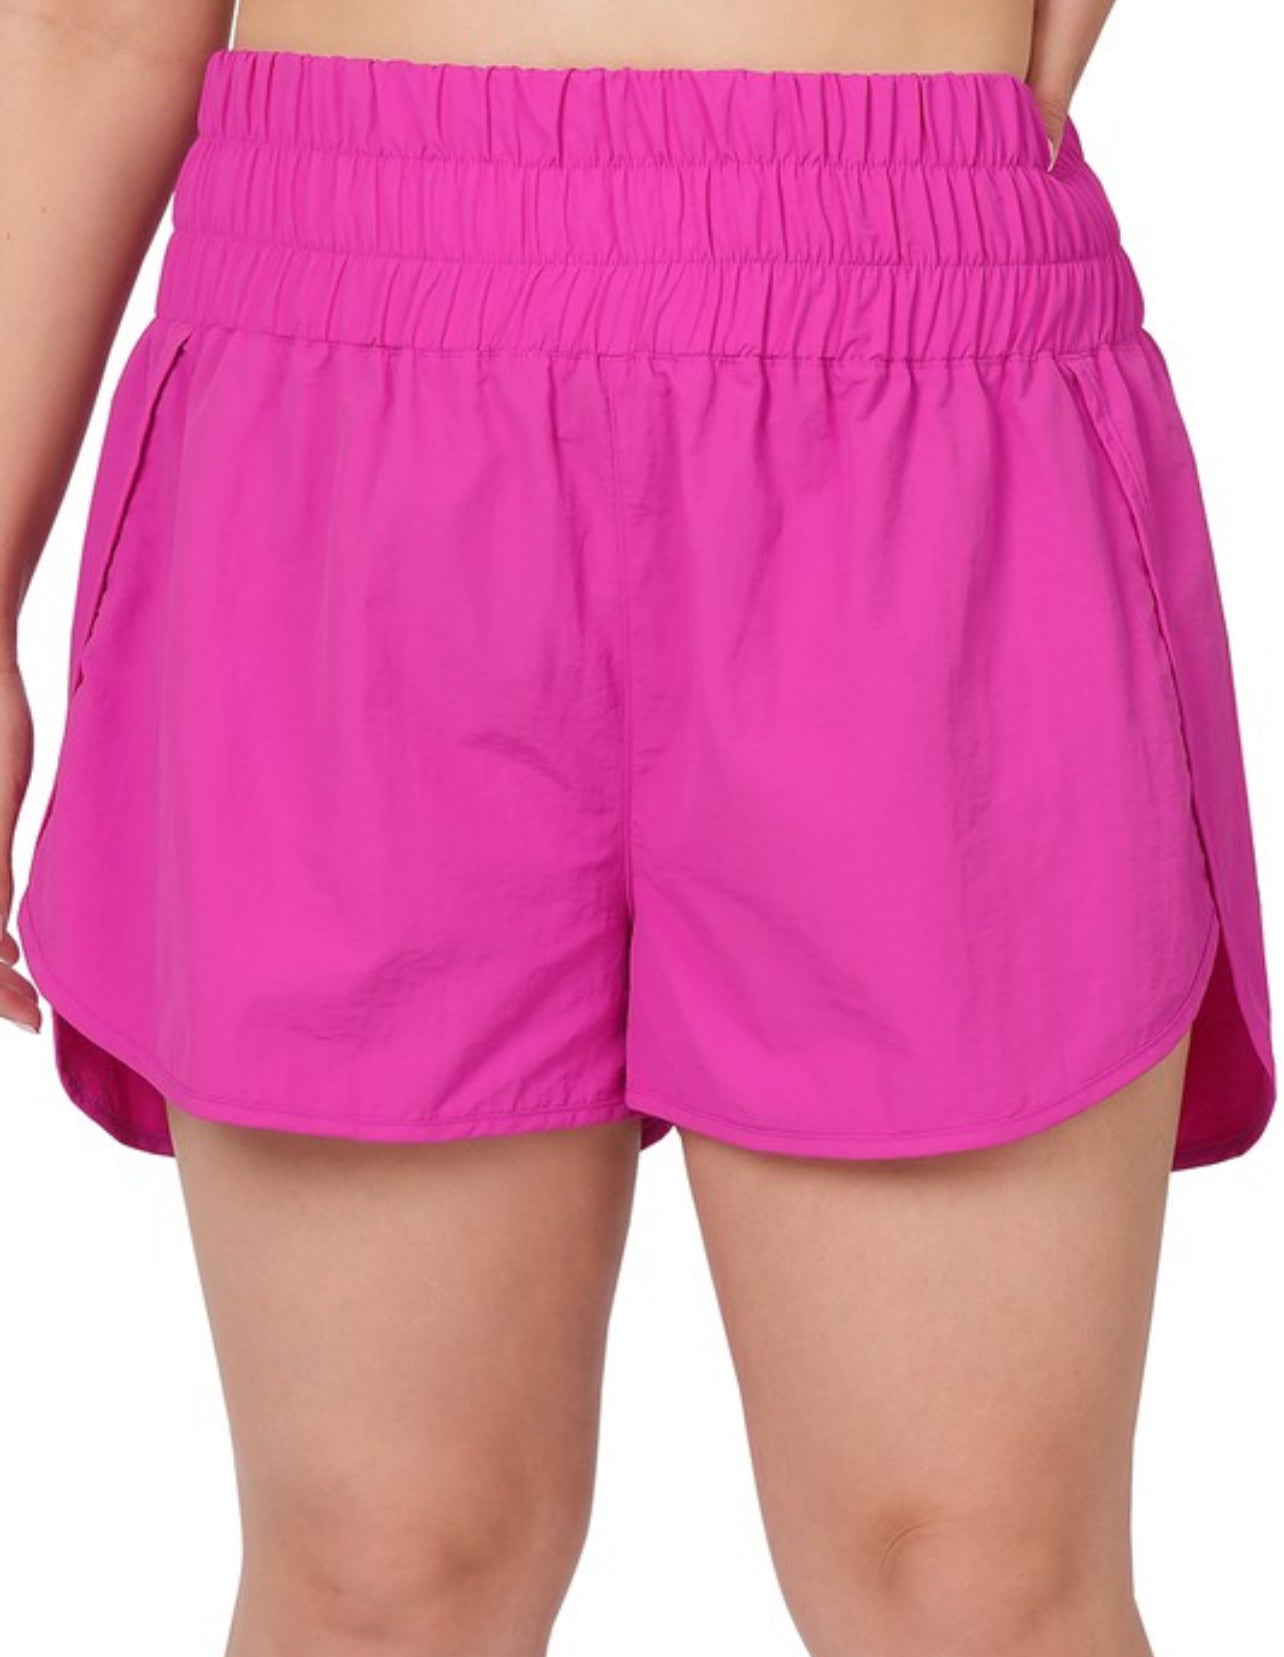 RUNNING TO YOU SHORTS - PLUS (MULTIPLE COLORS)